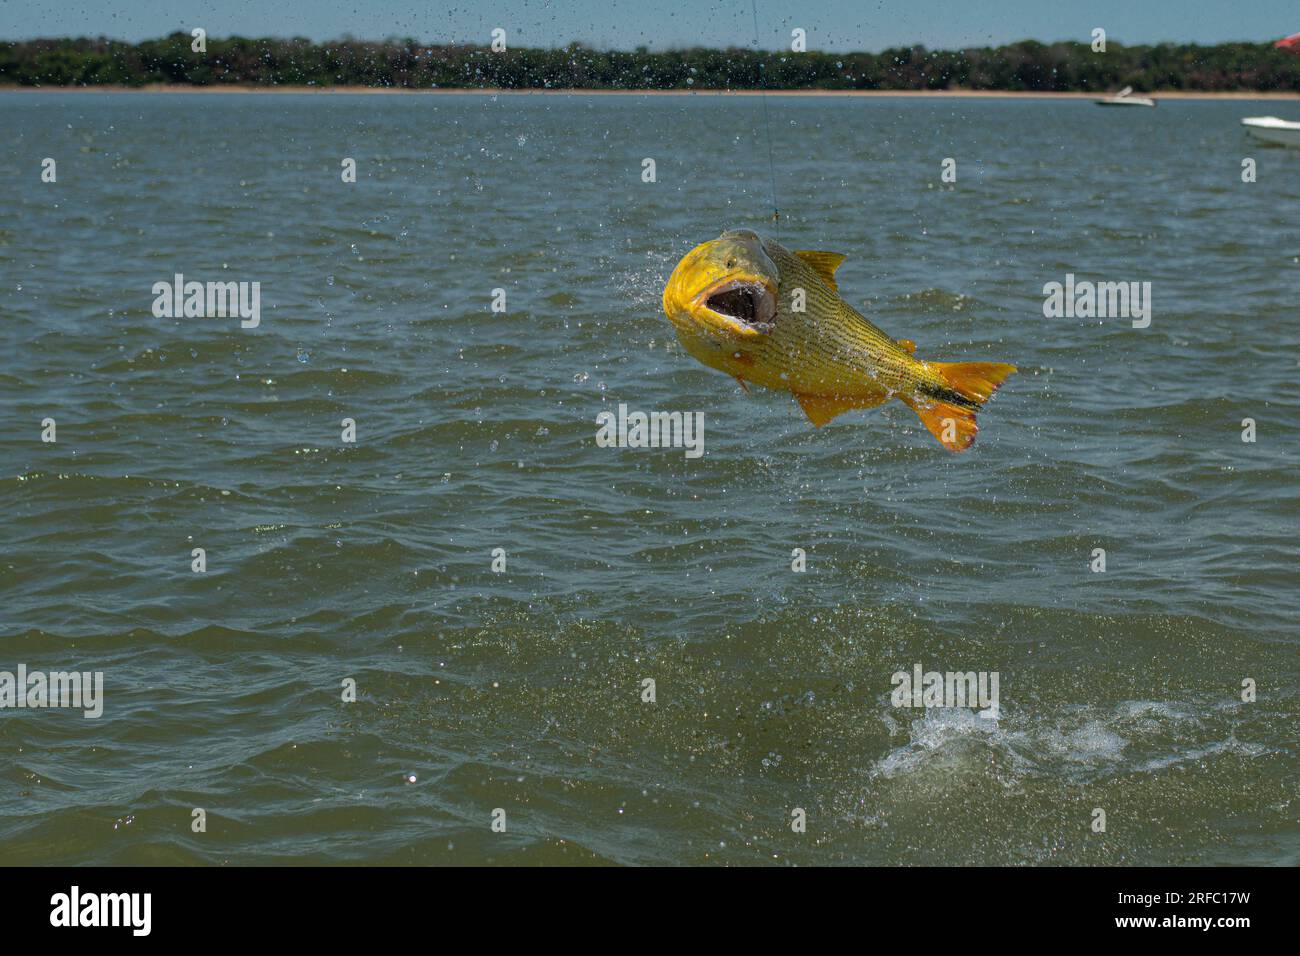 Big golden dorado (Salminus brasiliensis) jumping off the water during a catch on a fishing day. Stock Photo